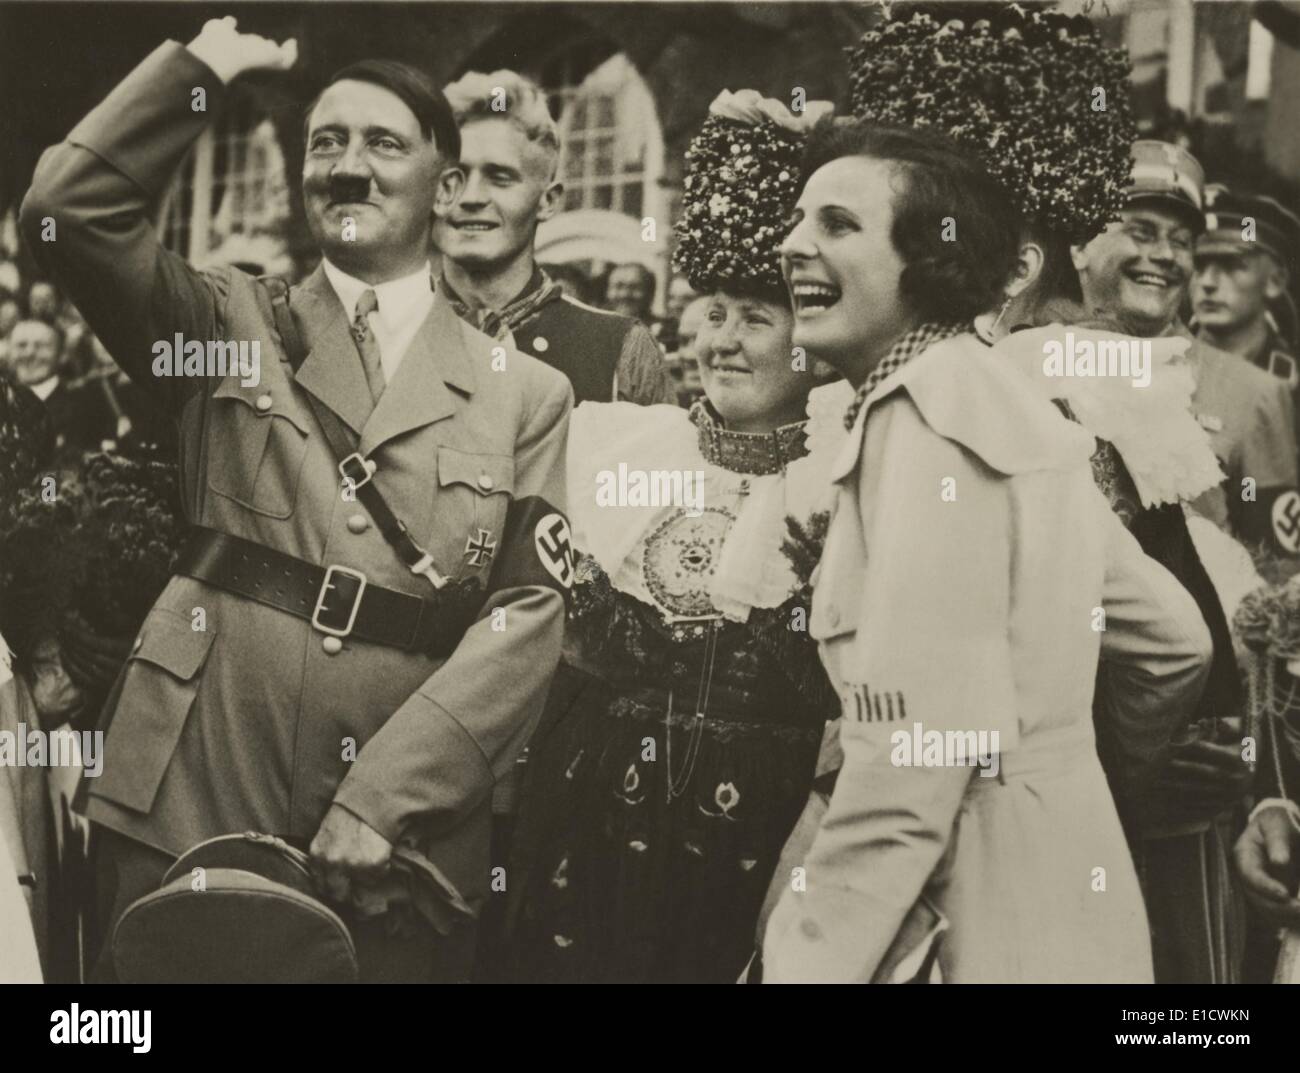 Adolf Hitler and filmmaker, Leni Riefenstahl, with joyous smiles. They are in a group with woman wearing traditional German Stock Photo